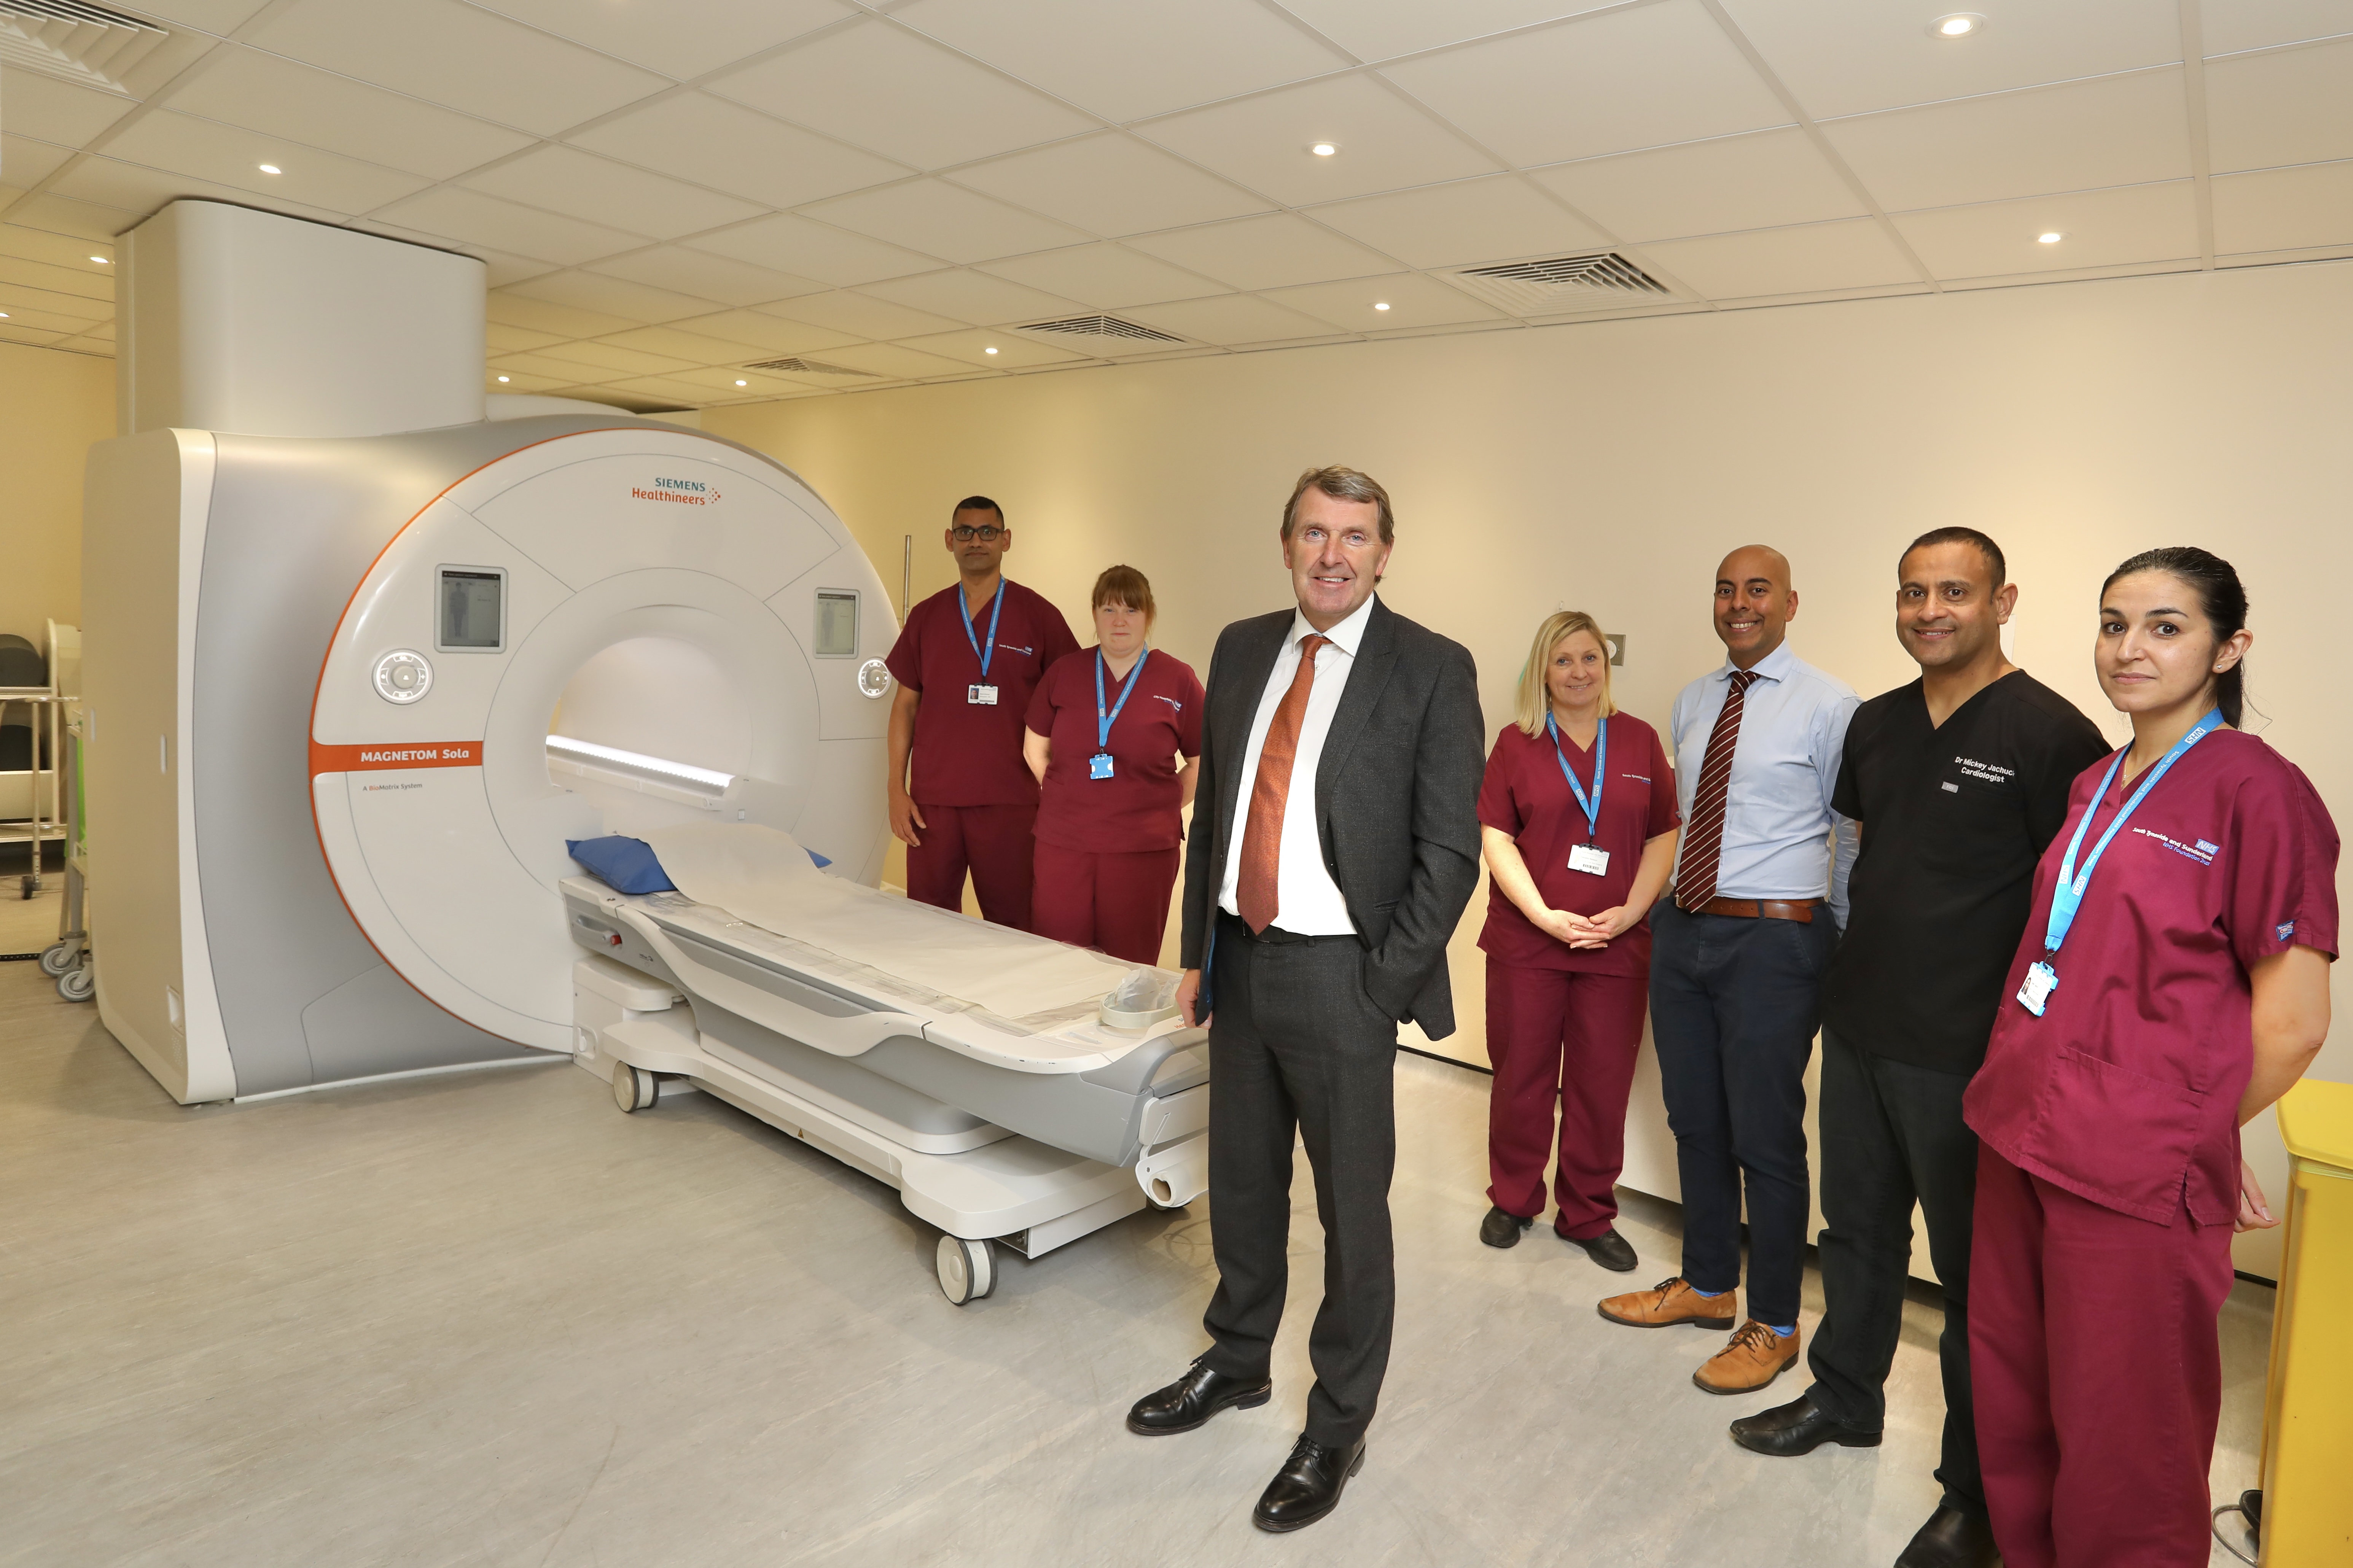 Chief Executive of South Tyneside and Sunderland NHS Foundation Trust Ken Bremner MBE with members of the radiography and cardiology team leading the new service..jpg